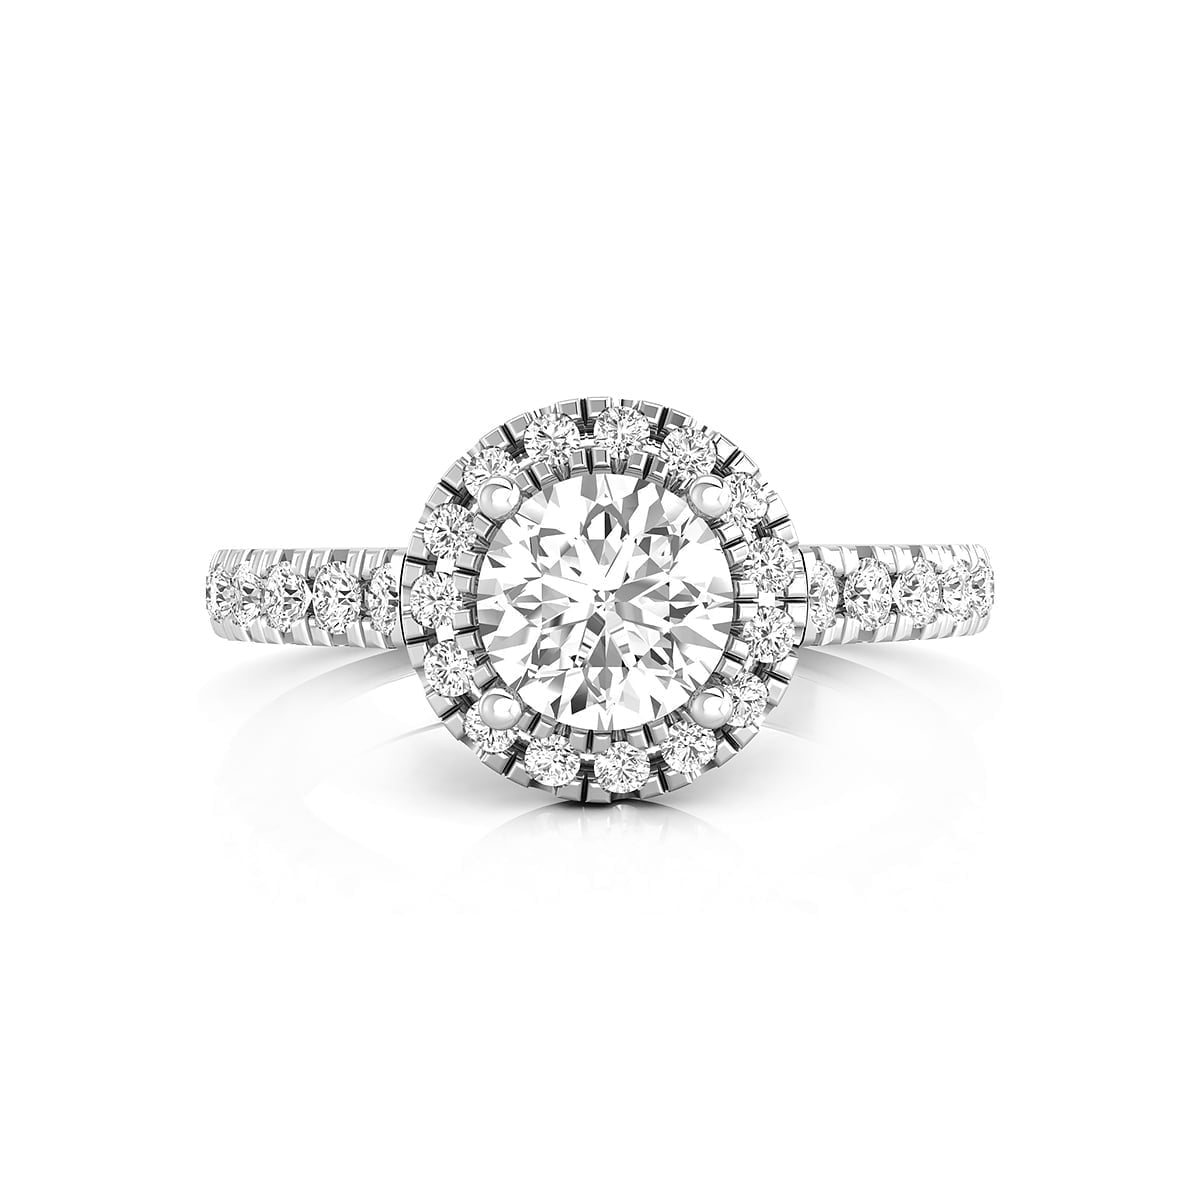 Round Cut Moissanite Frame Engagement Proposal Ring For Women Or Girls (1 1/5 TCW)